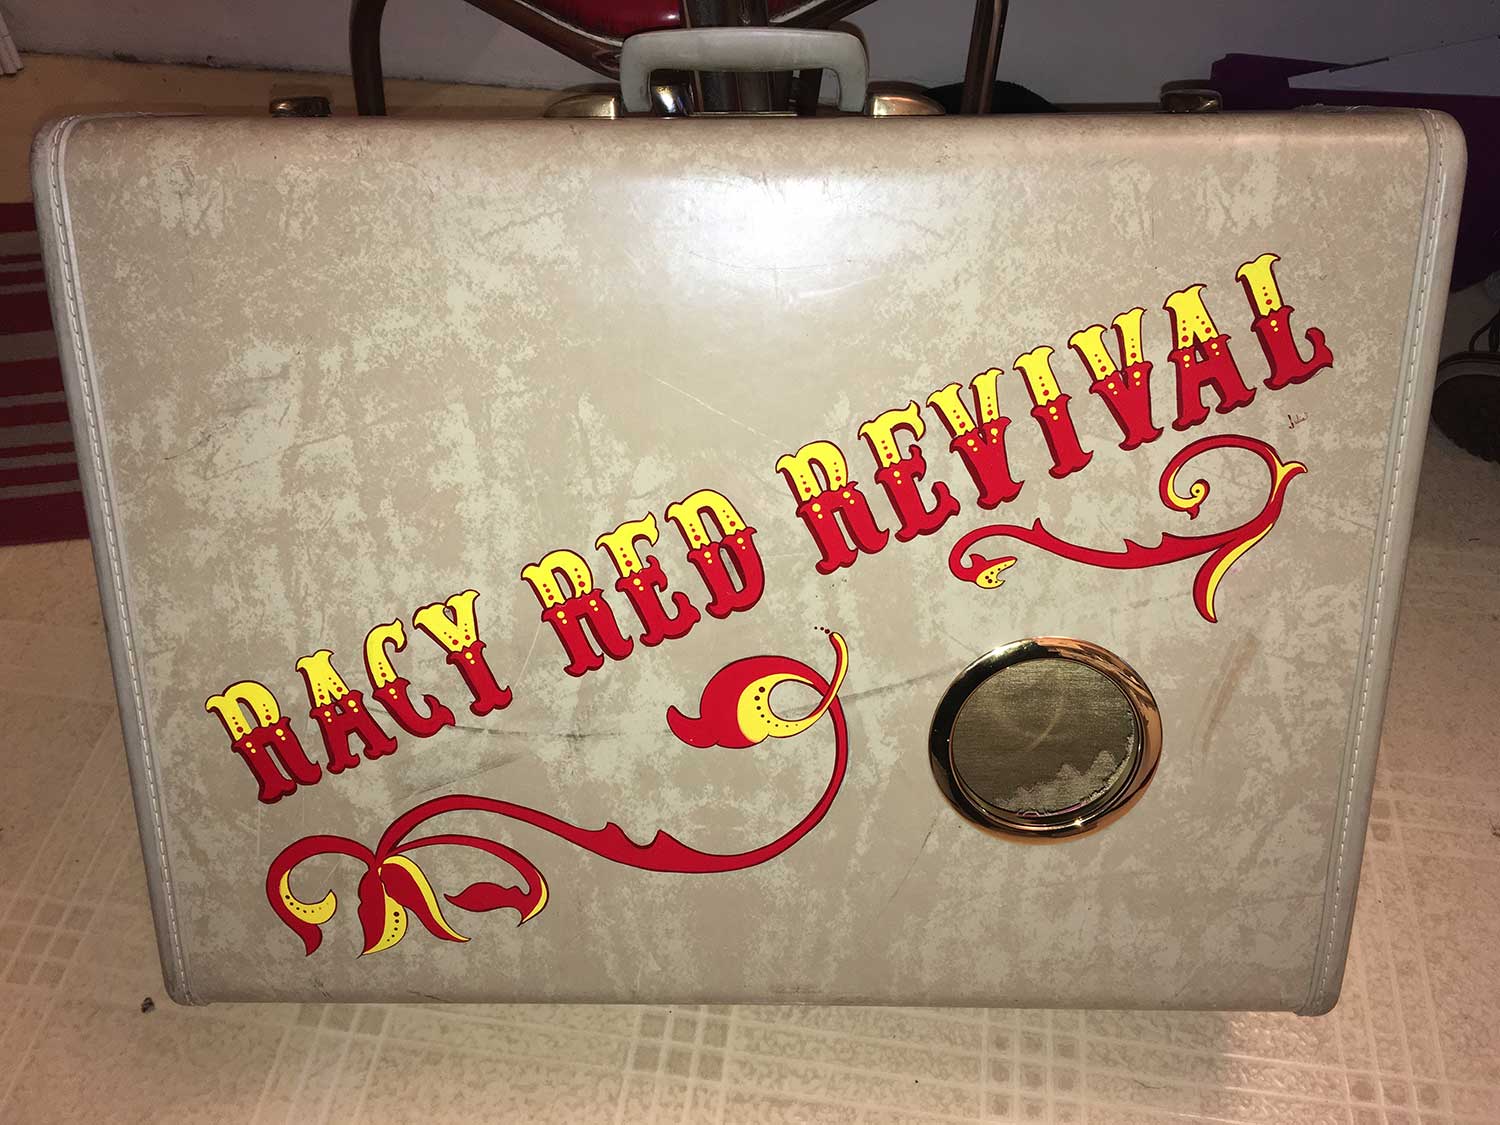 Lettering and pinstriping by Julie Fournier on a Vintage Suitcase turned into a speaker for the band Racy Red Revival